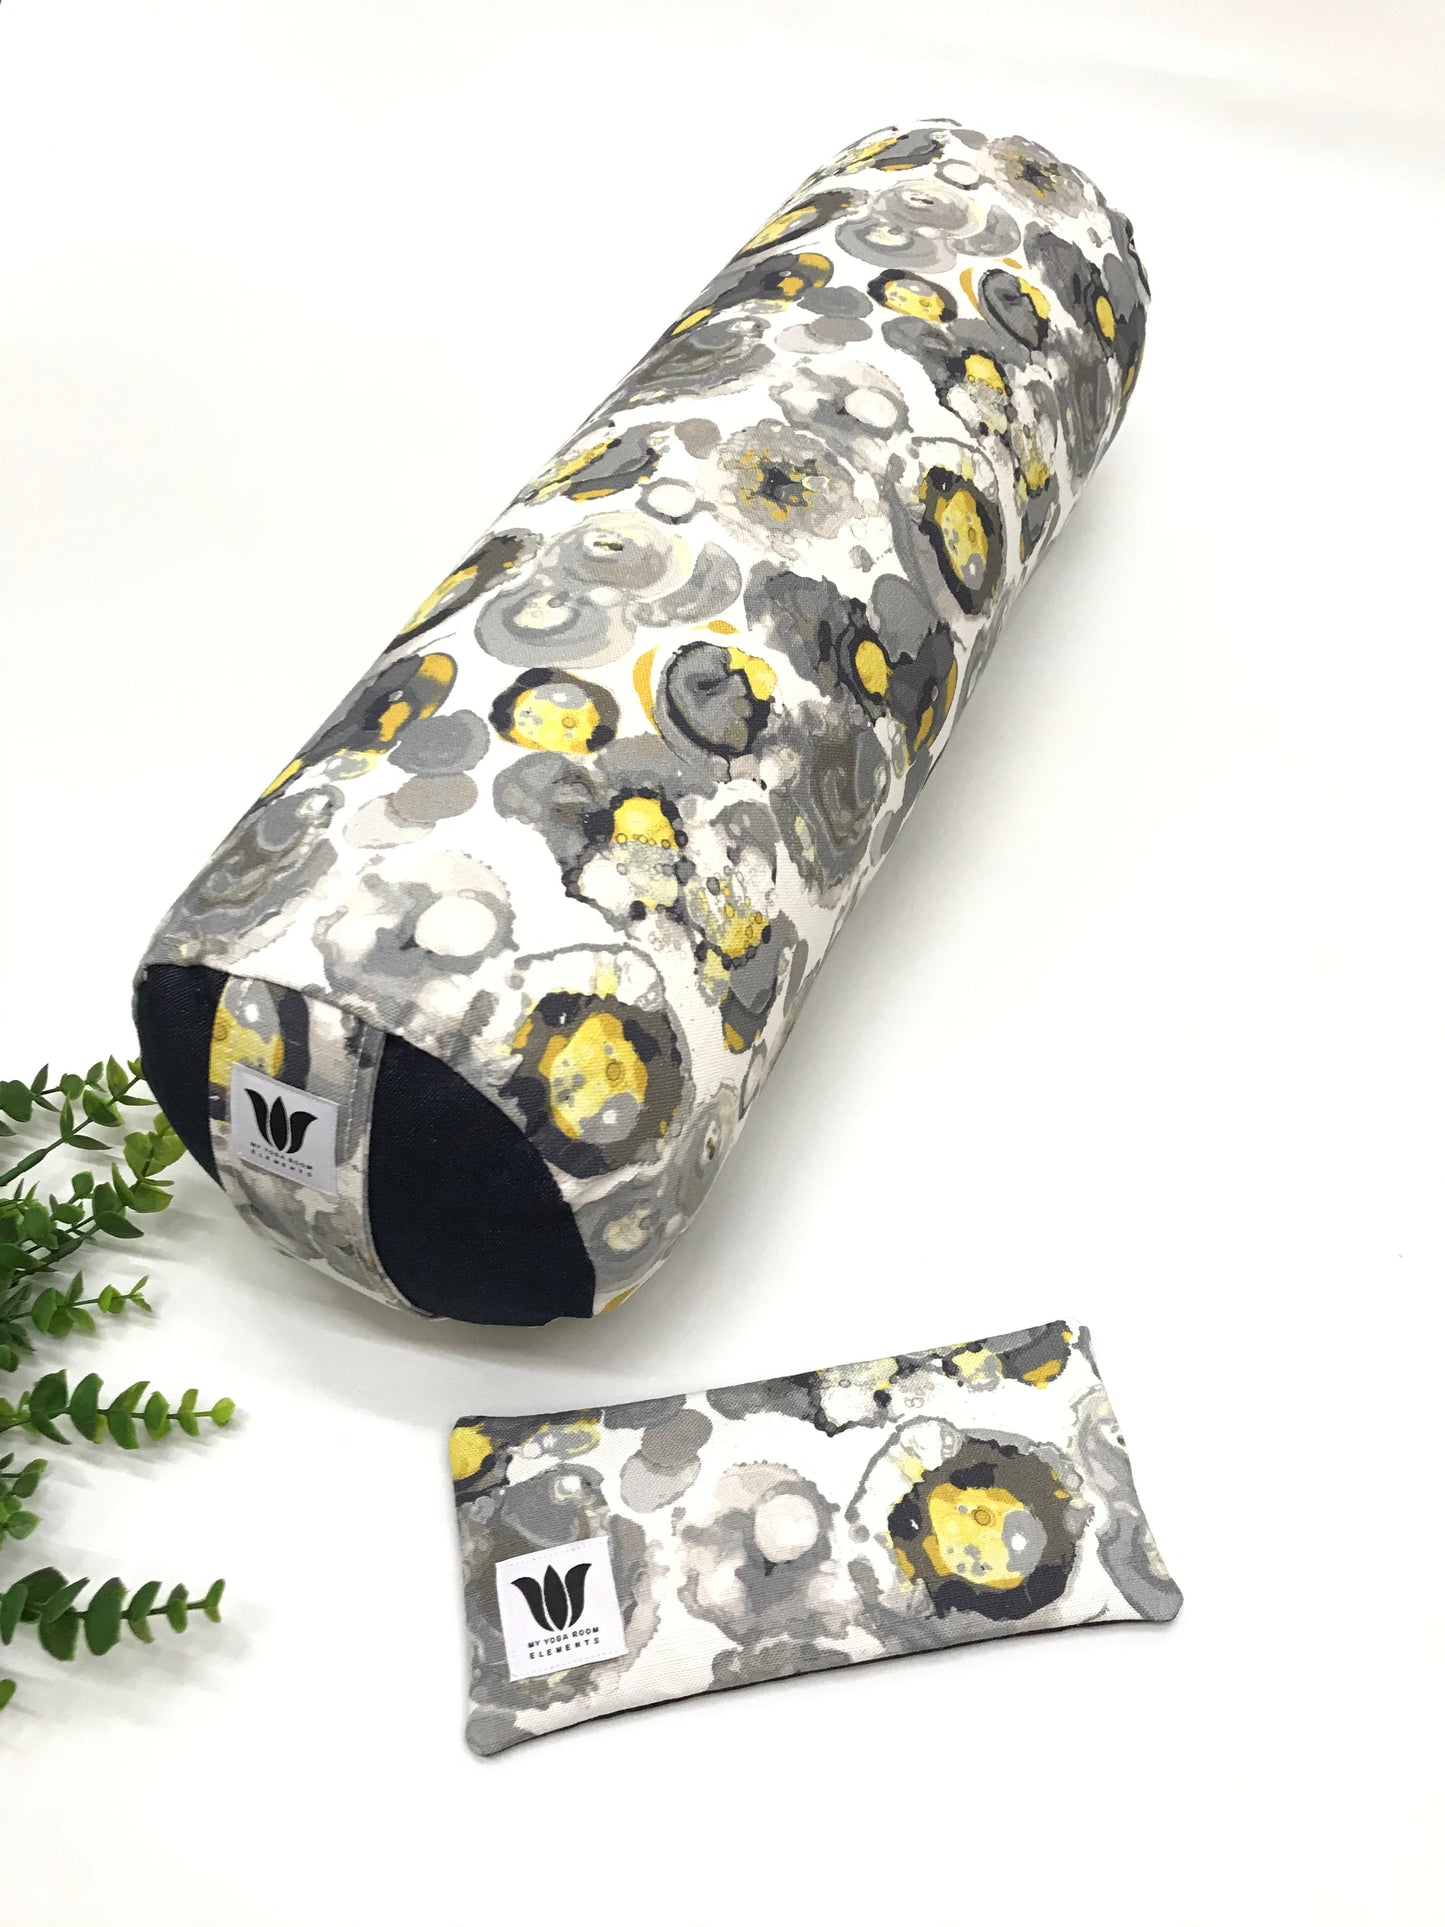 Yoga Bolster Set, round yoga bolster with matching eye pillow. Watercolour print in blue, white, grey and yellow, Handcrafted in Calgary, Alberta, Canada by My Yoga Room Elements.